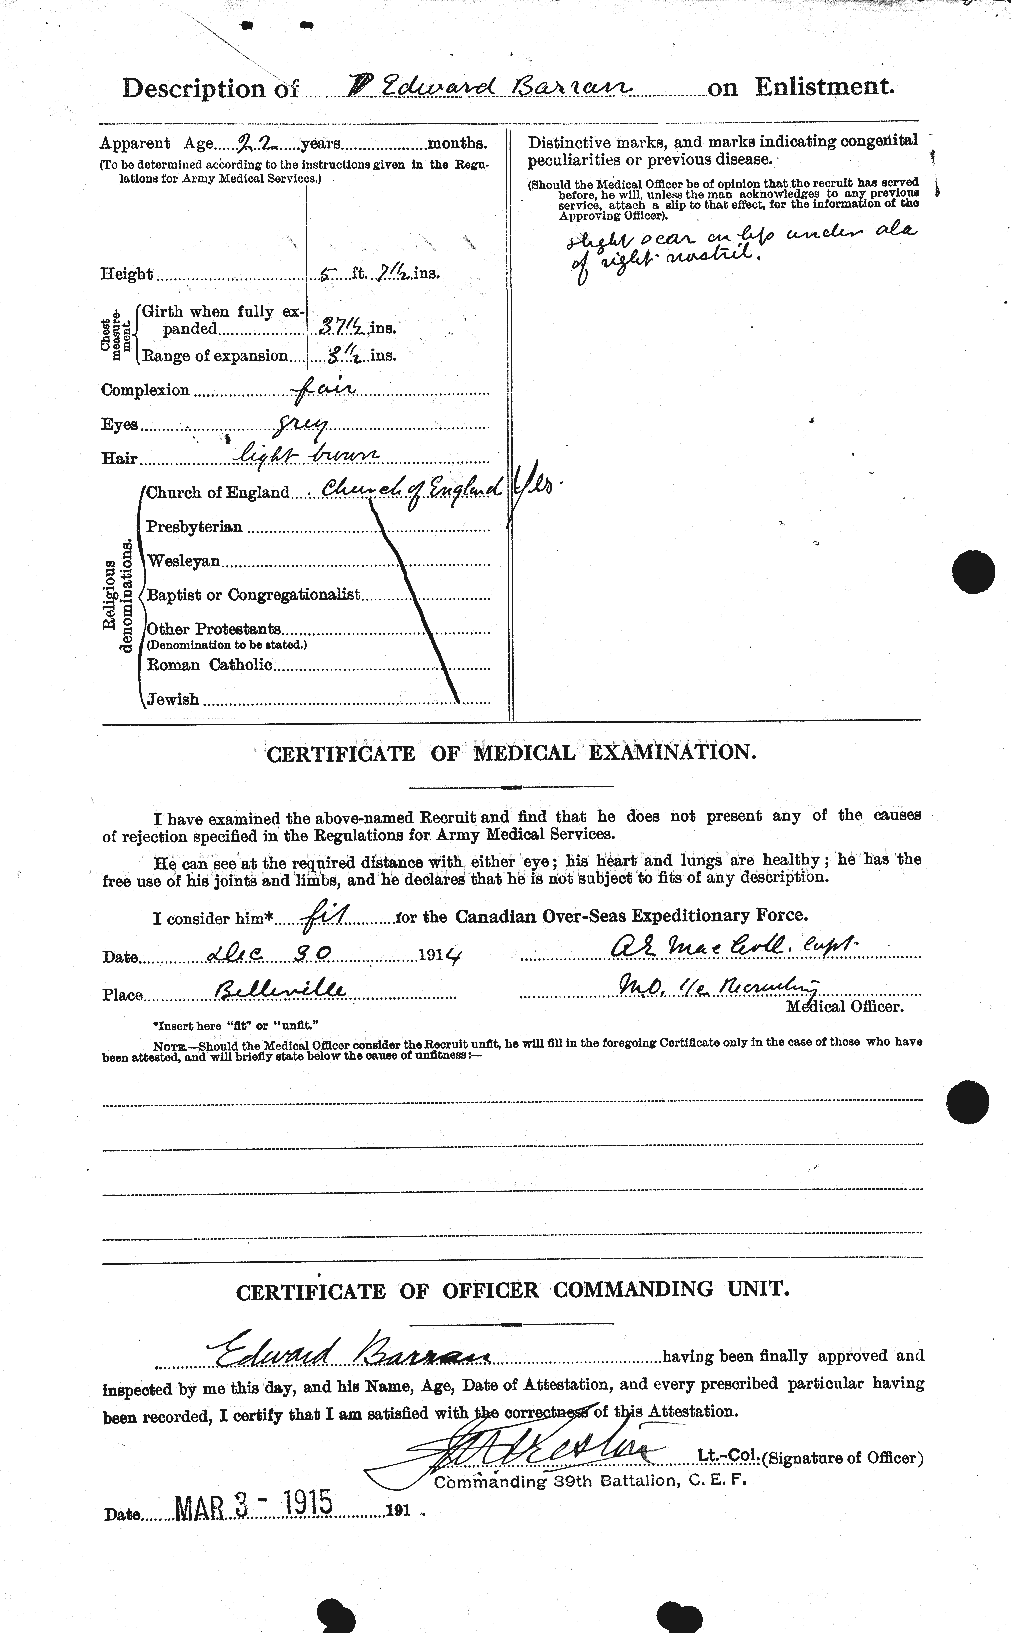 Personnel Records of the First World War - CEF 221587b